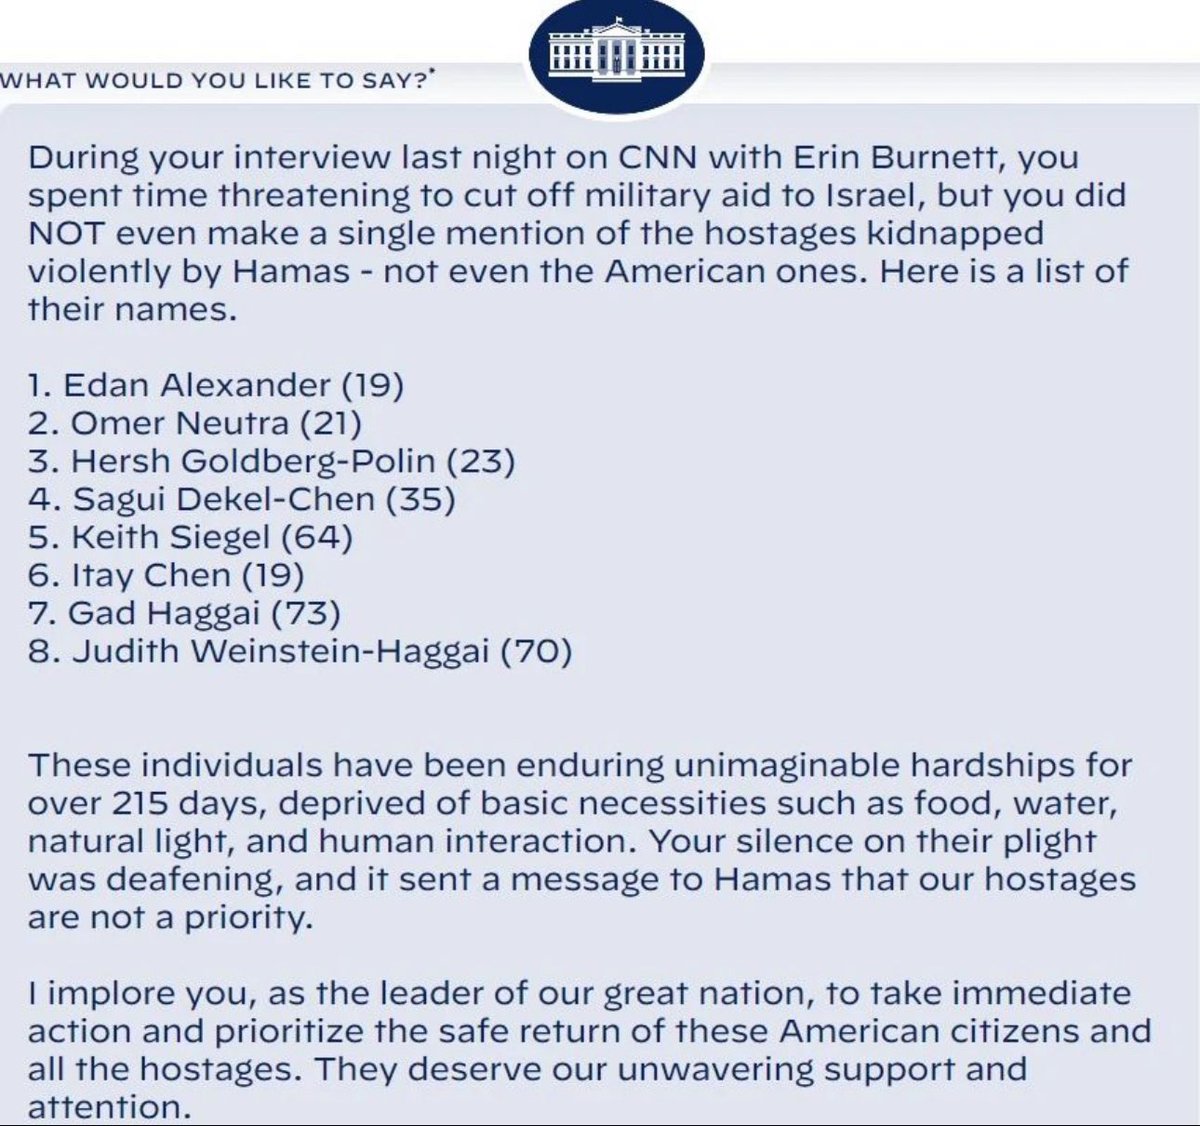 🌍📢 We need you! Please contact the White House today and share this message, the hostages MUST remain everyone's top priority. BRING THEM ALL HOME NOW! WhiteHouse.gov/contact To copy this text, open this tread ⬇️ #BringThemHomeNow #bring_hersh_home #TheAmerican8